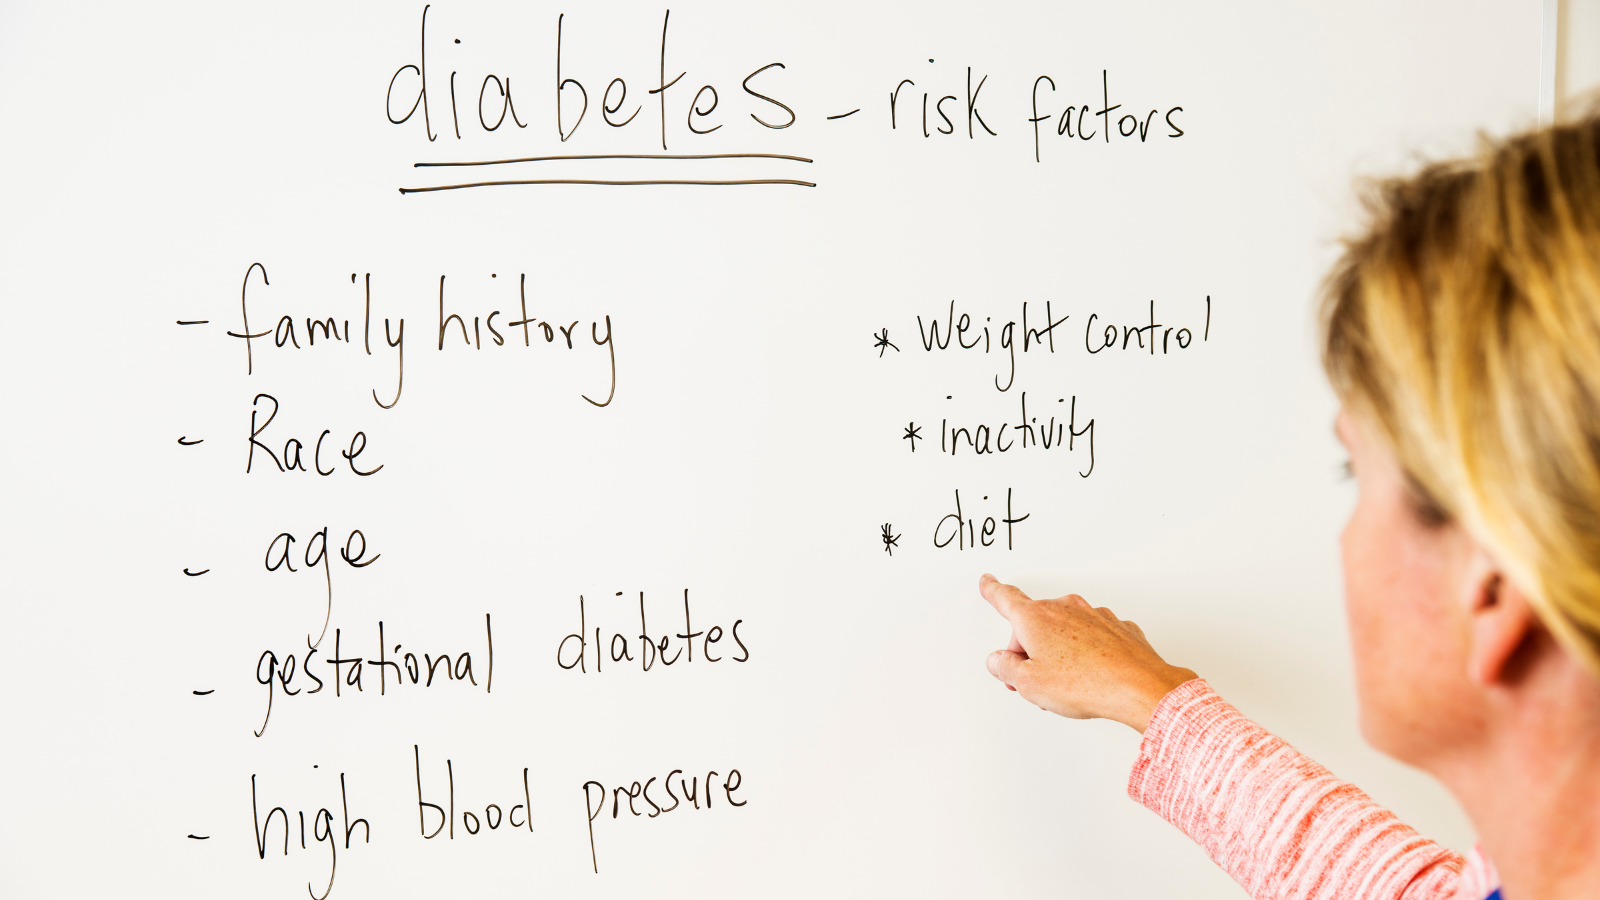 Modifiable and non-modifiable risk factors for type 2 diabetes